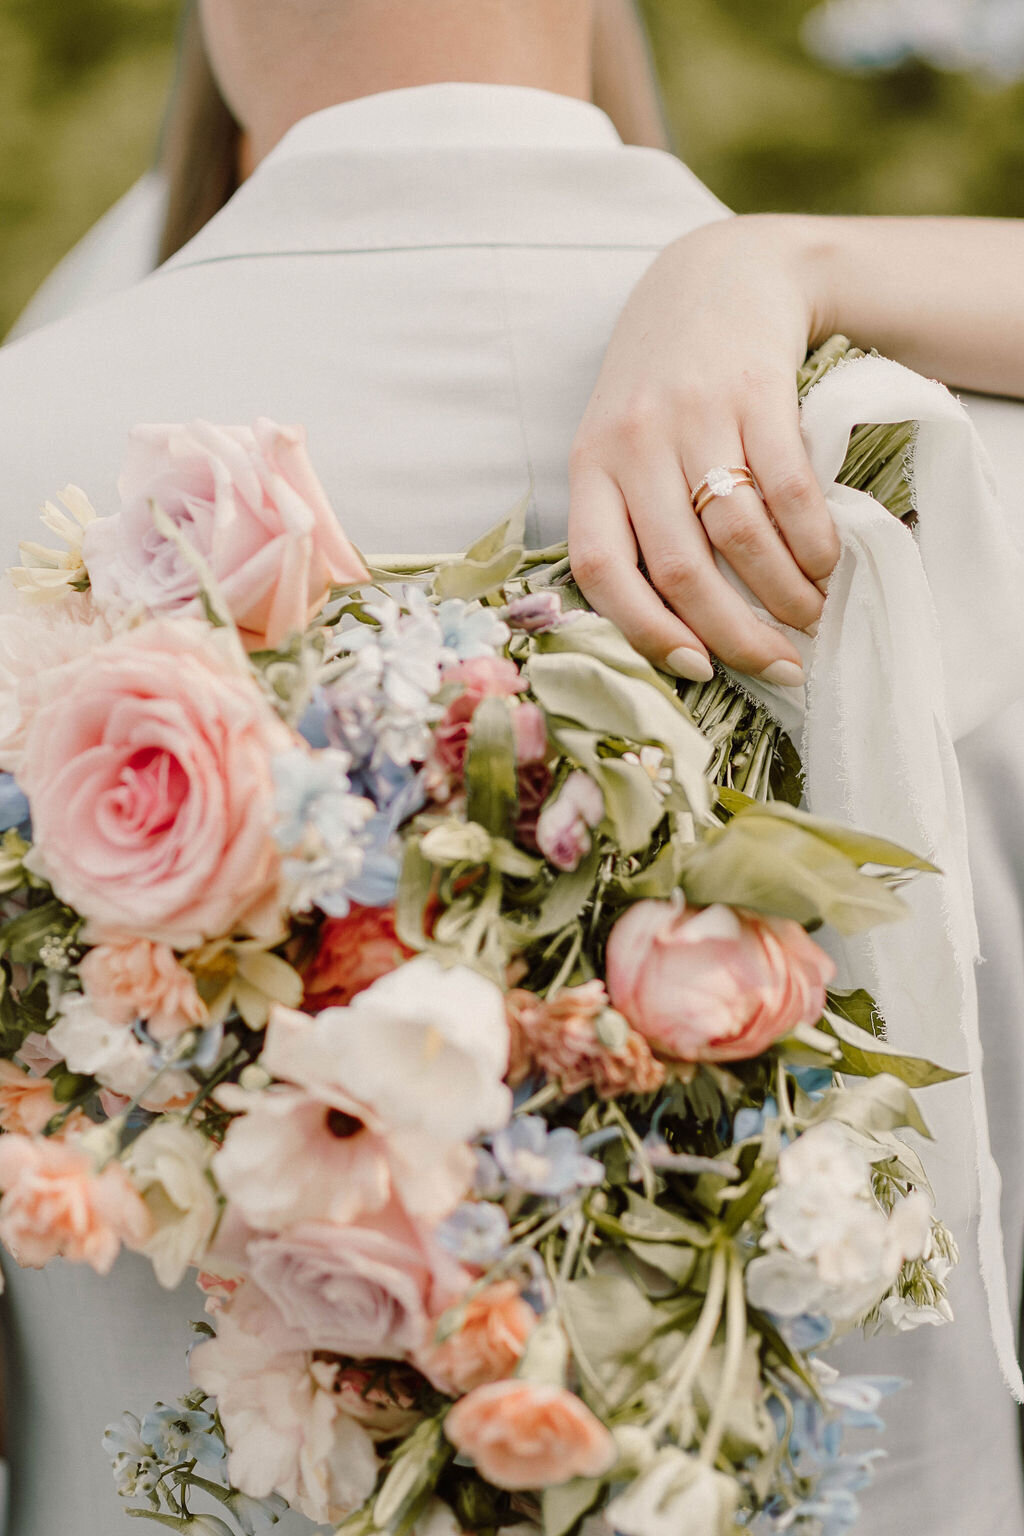 Shades of pink, peach, and blue floral bouquet